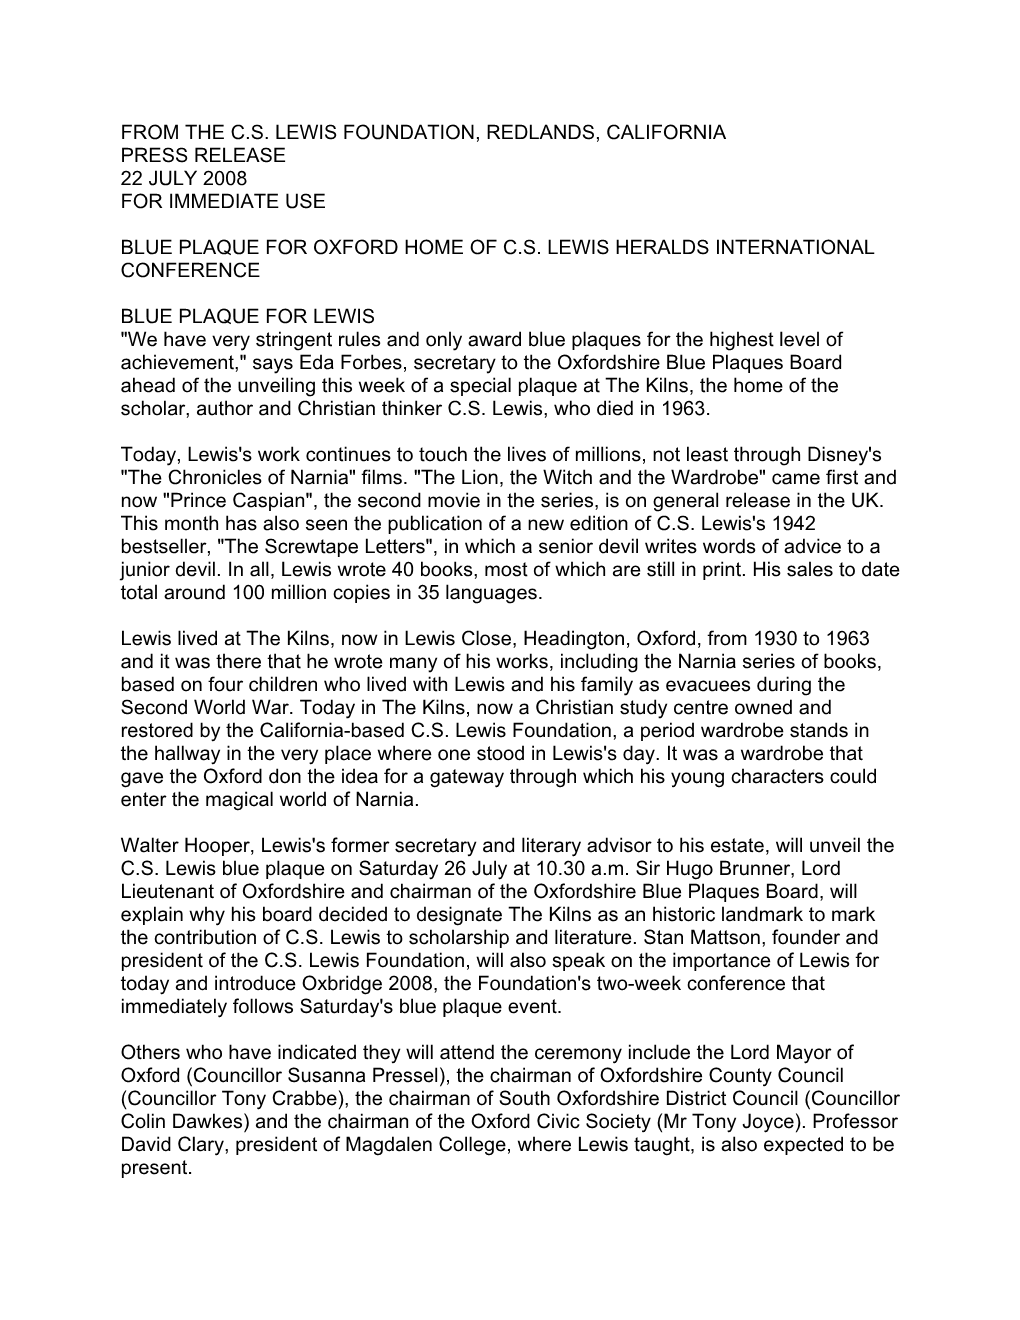 From the C.S. Lewis Foundation, Redlands, California Press Release 22 July 2008 for Immediate Use